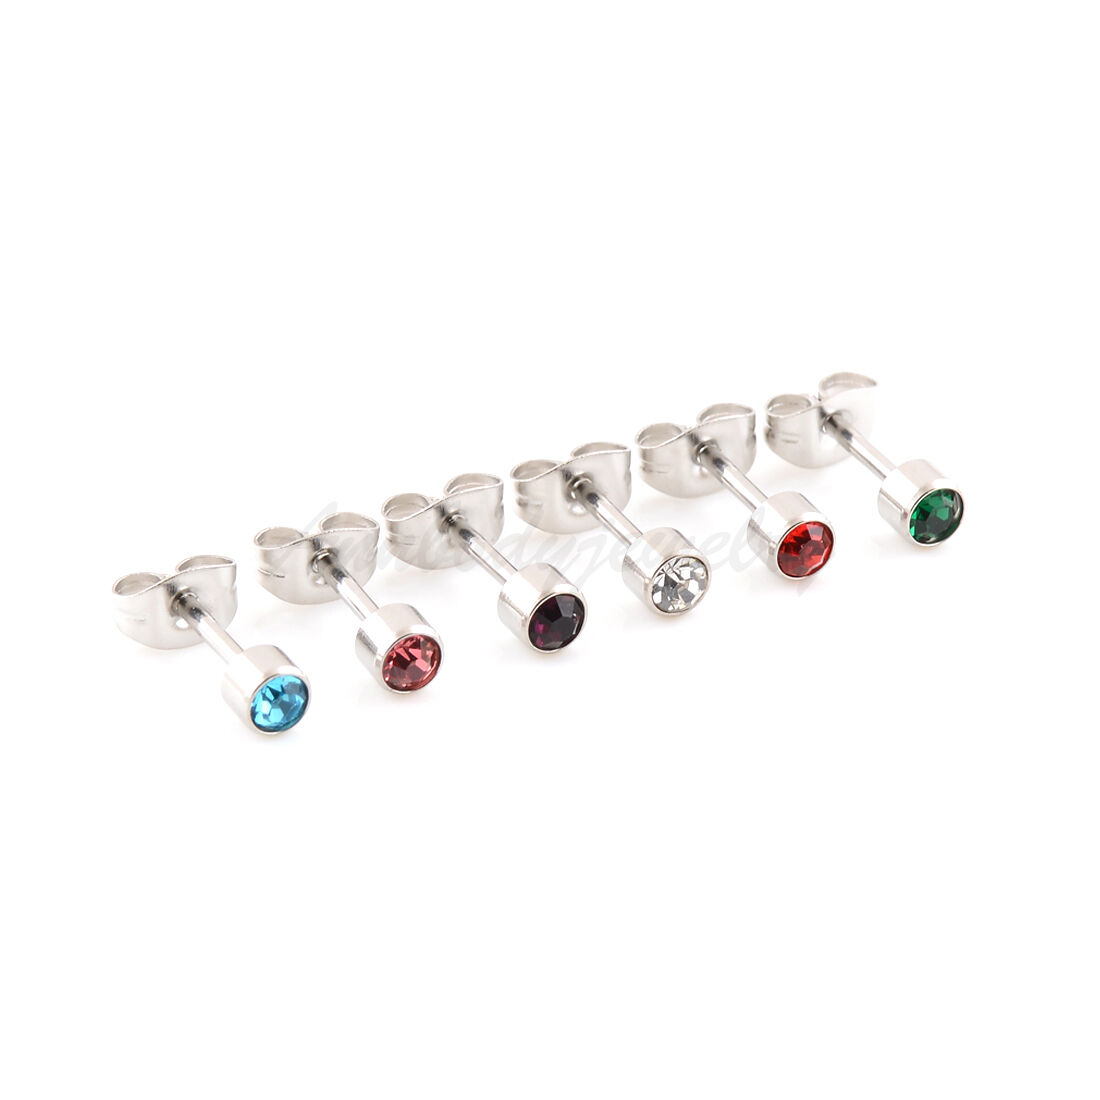 6 Pairs 16g 316L Steel Crystal Birthstone Ear Stud Earring Piercing Color Mixed Body jewelry